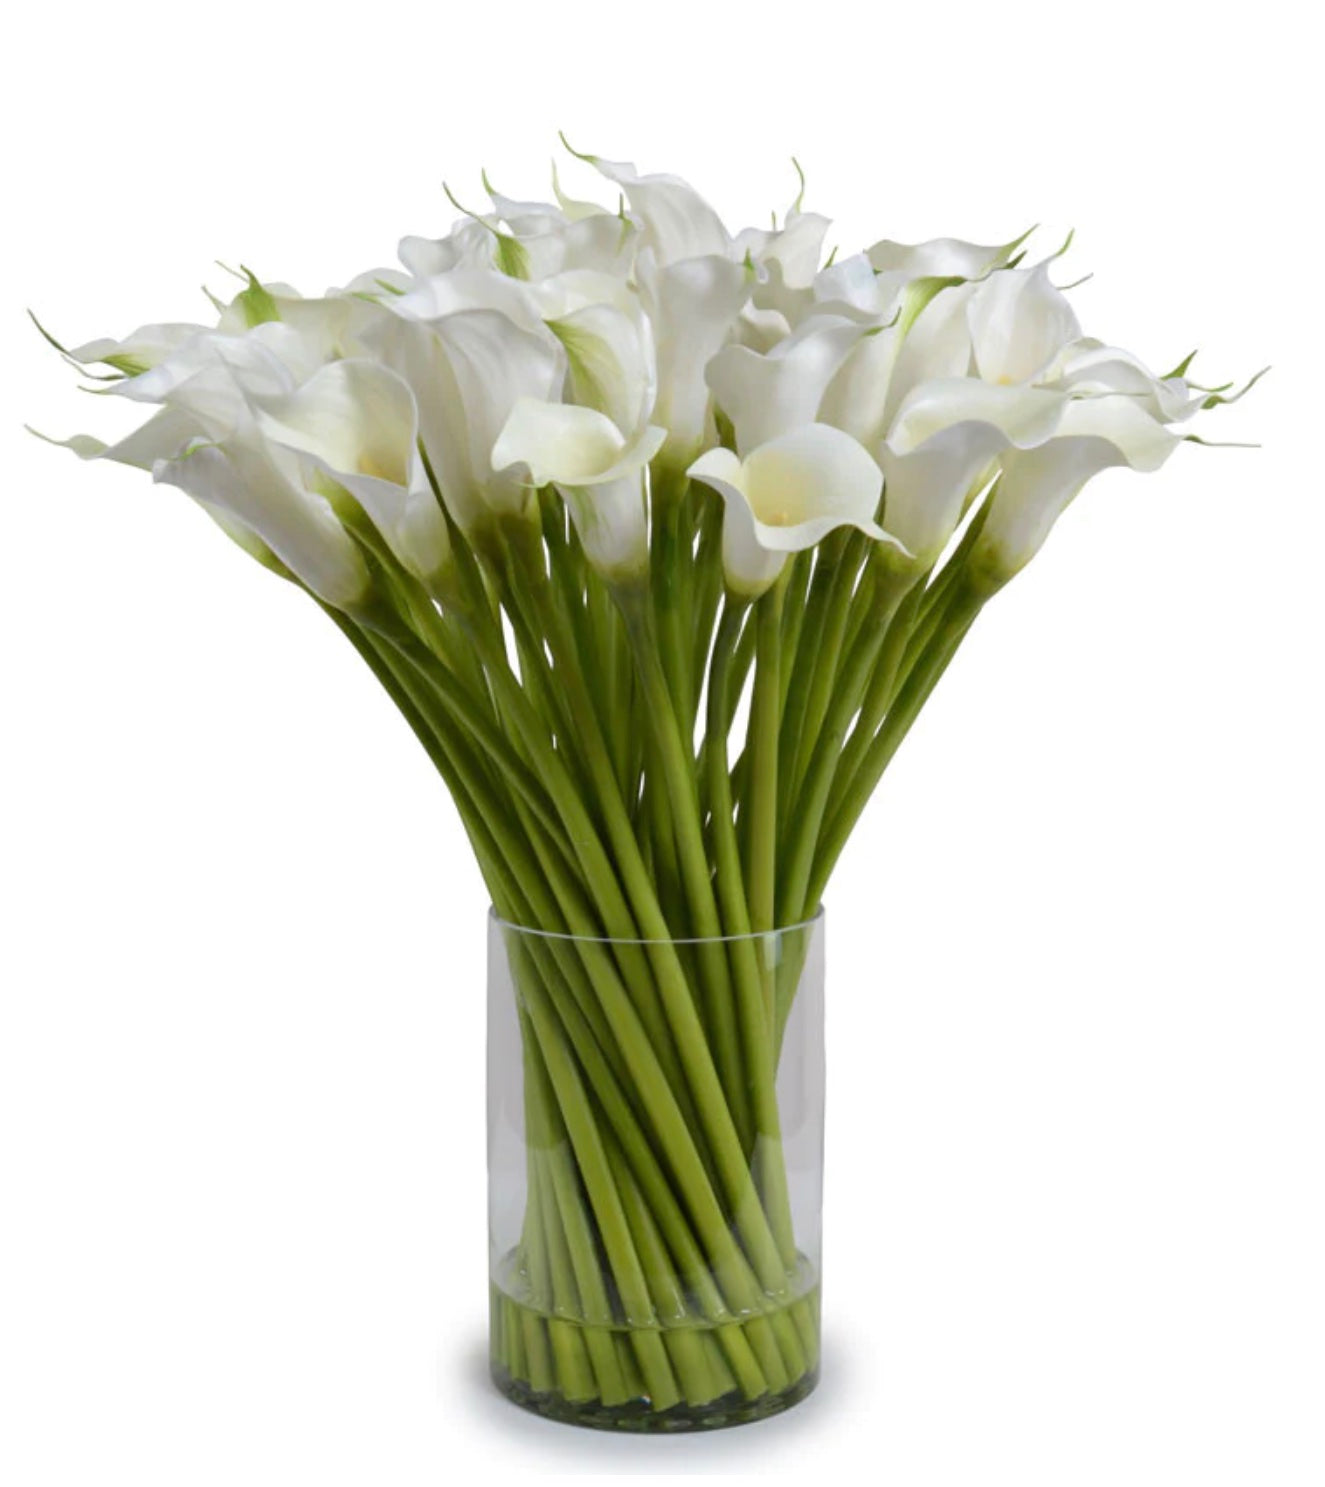 Calla Lily Arrangement in Tall Glass - White